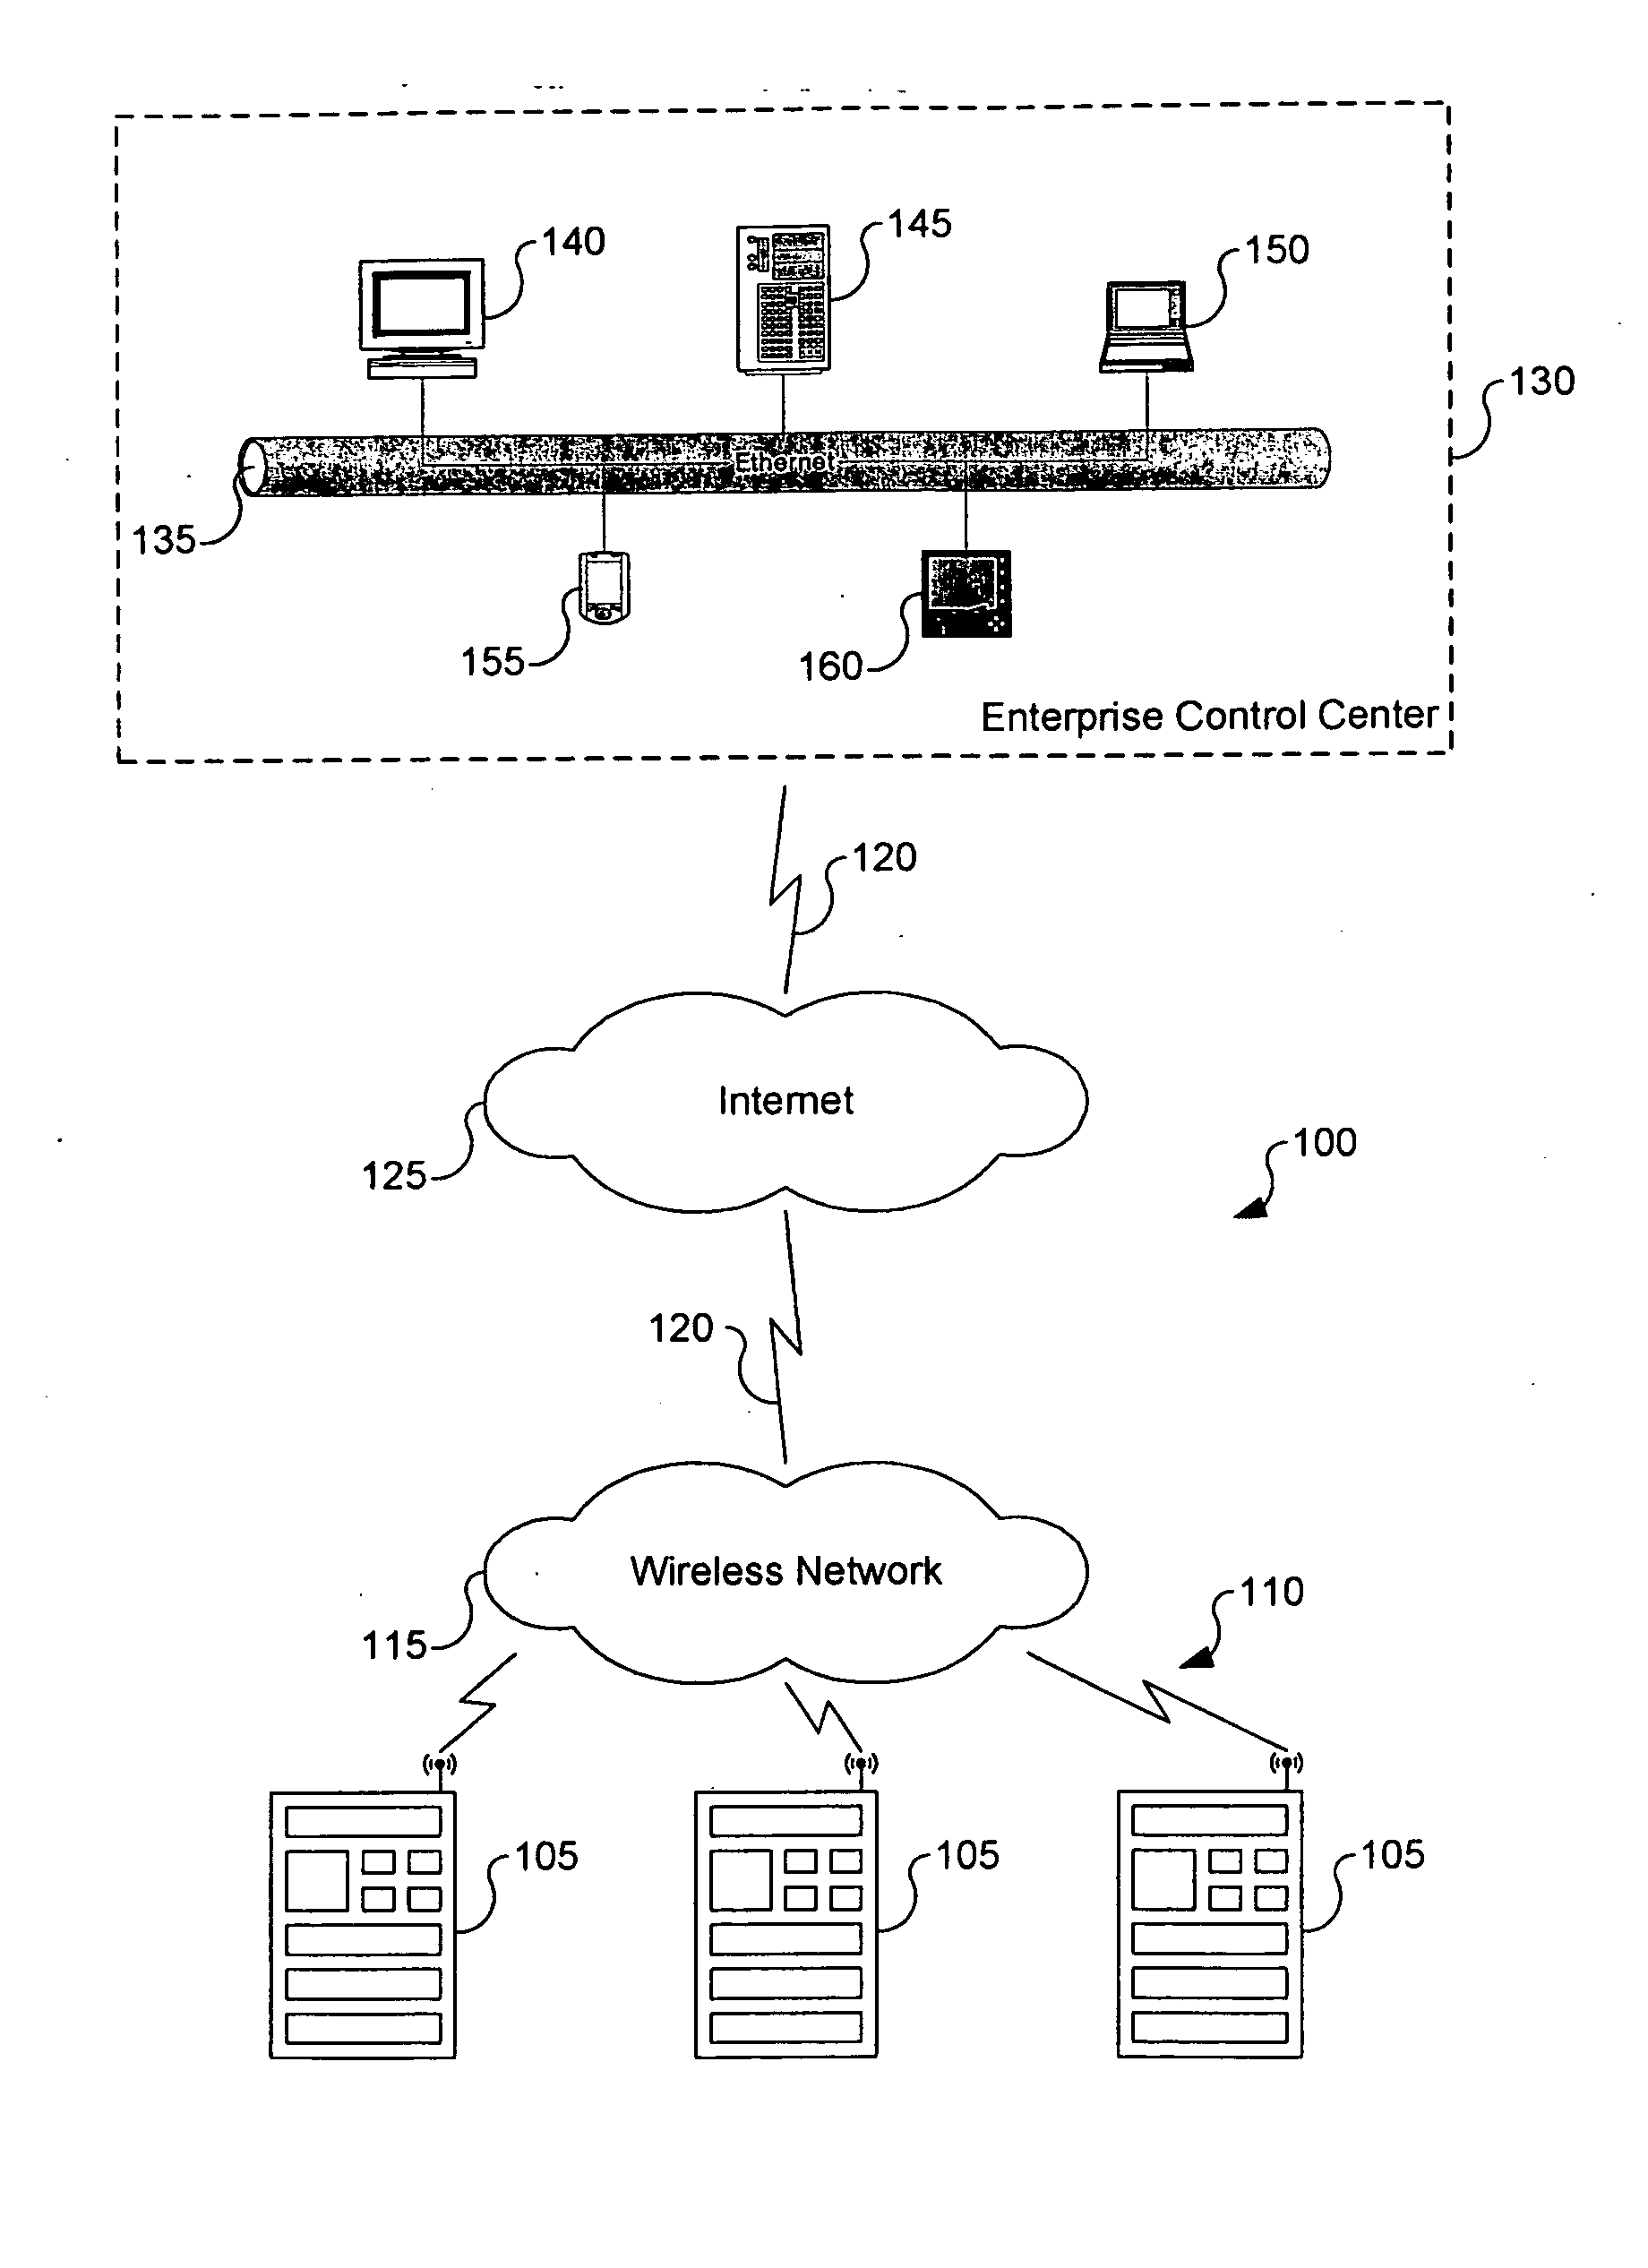 Multimedia system and method for controlling vending machines